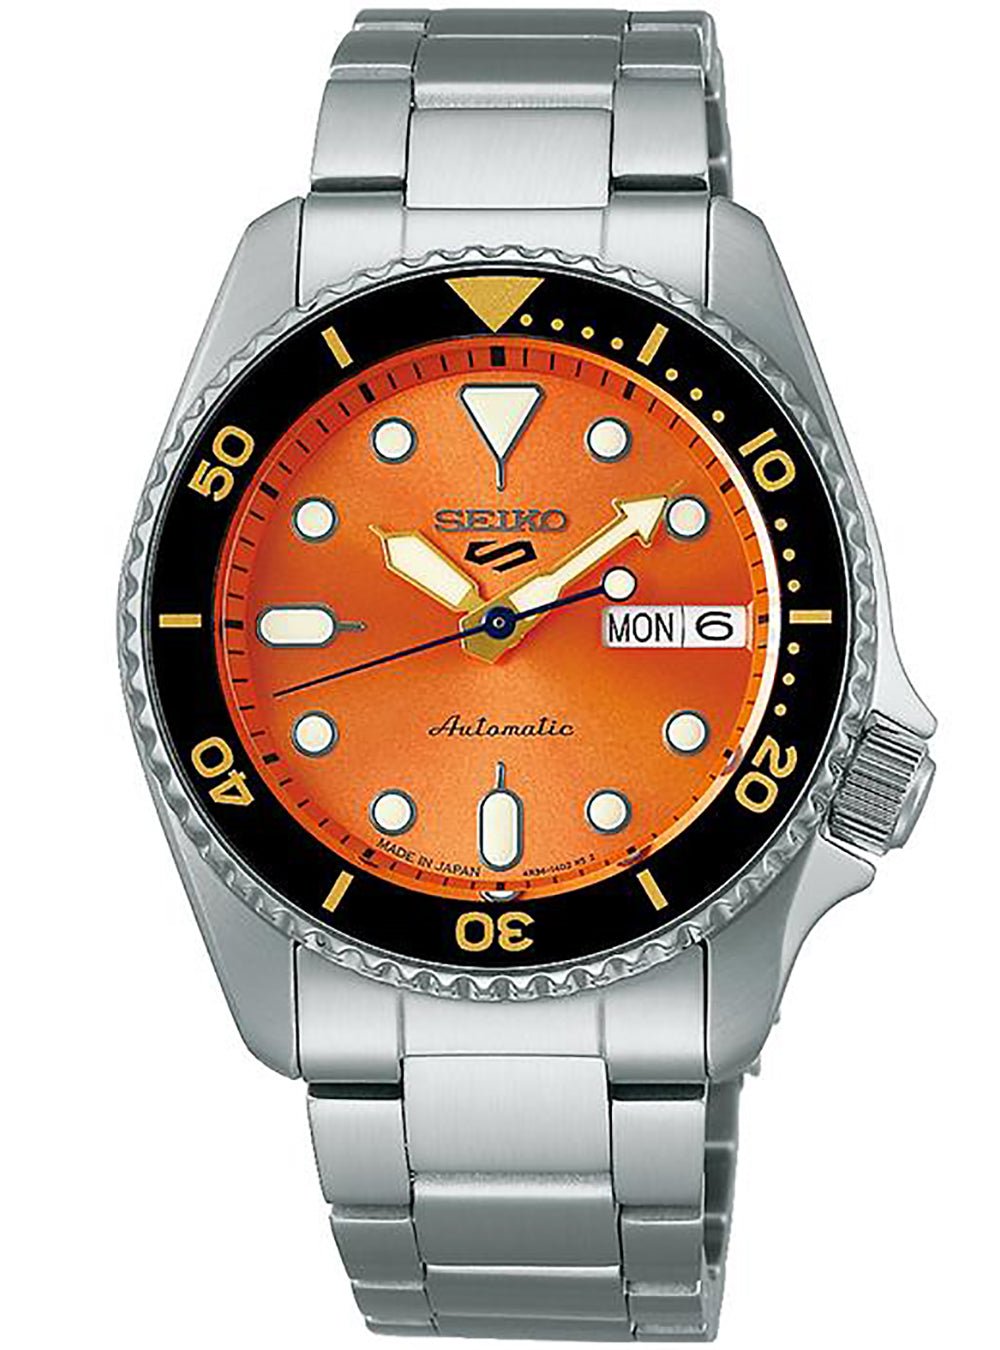 SEIKO 5 SPORTS SKX SPORTS STYLE MADE IN JAPAN JDM